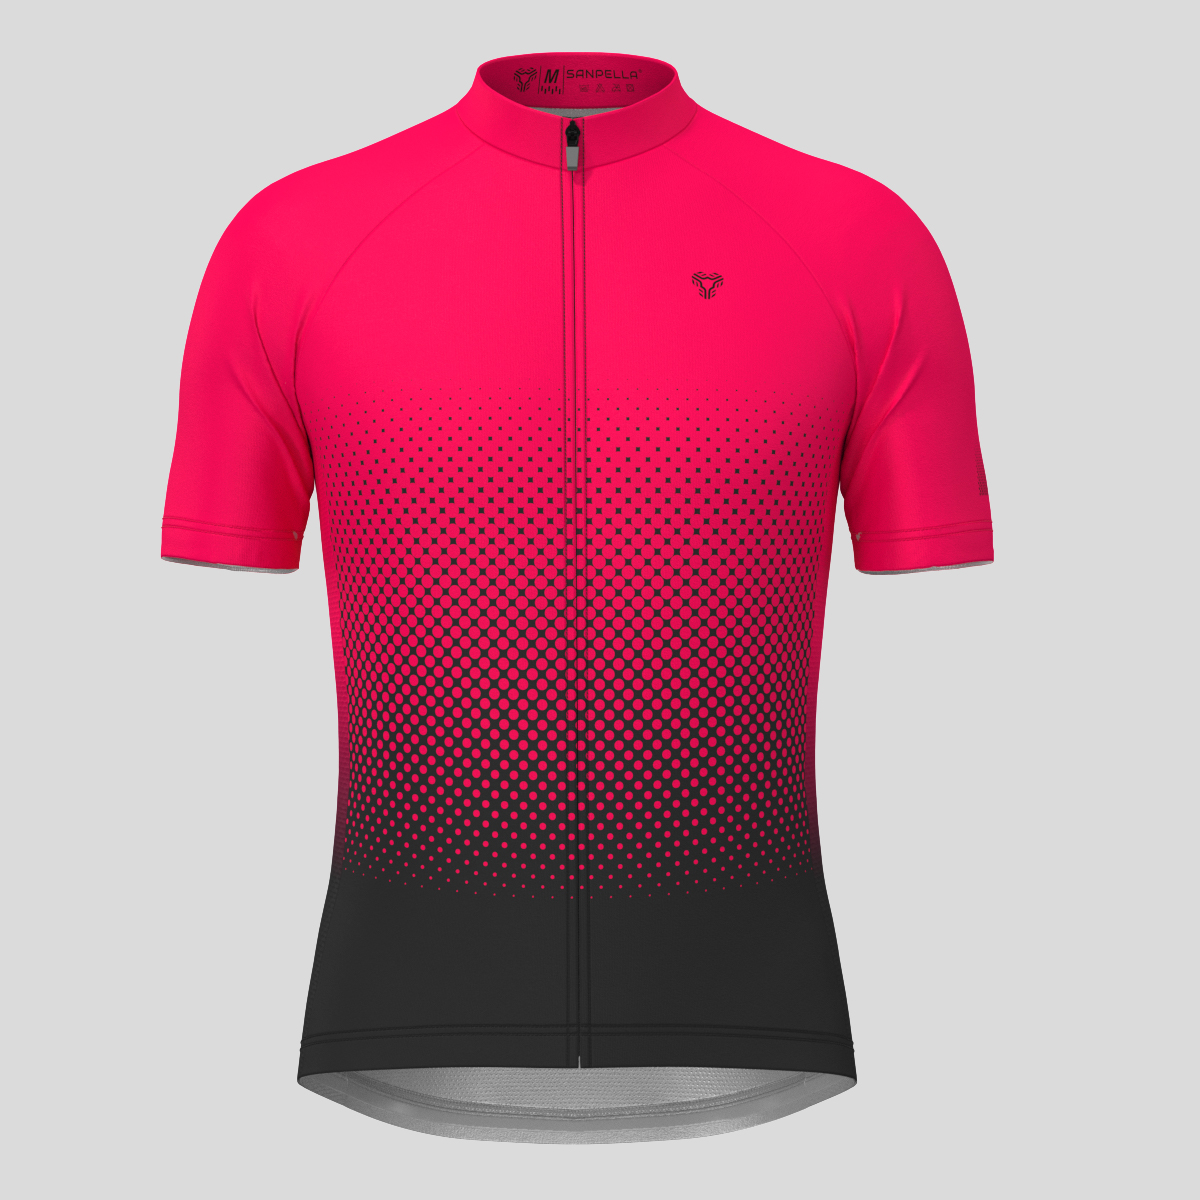 Polka Dot Gradient Men's Cycling Jersey - Jester Red